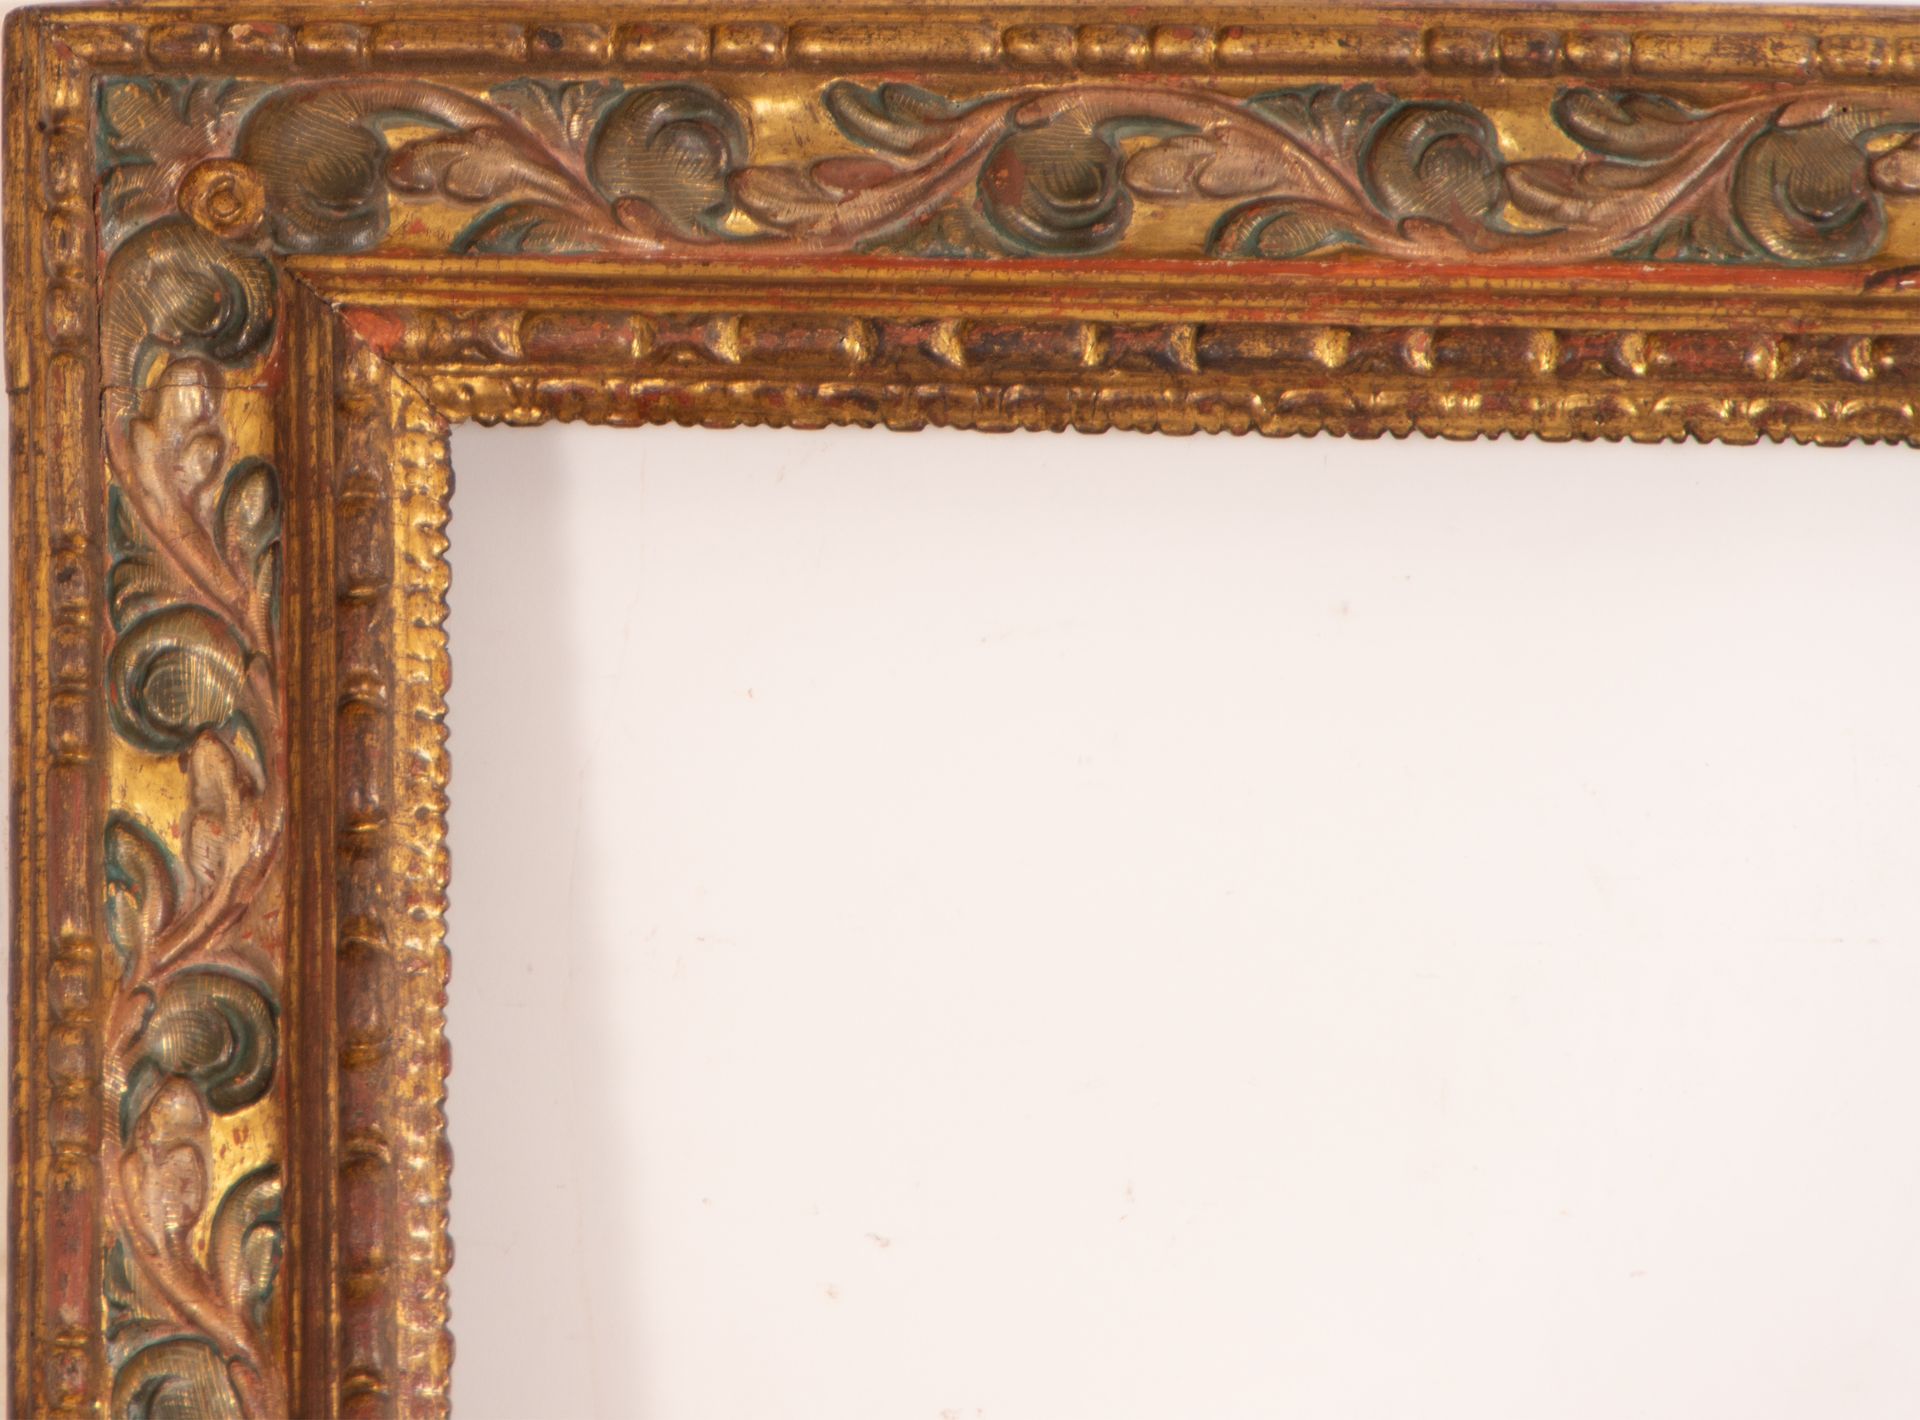 Exceptional Spanish Baroque Polychrome Frame, 17th century - Image 2 of 9